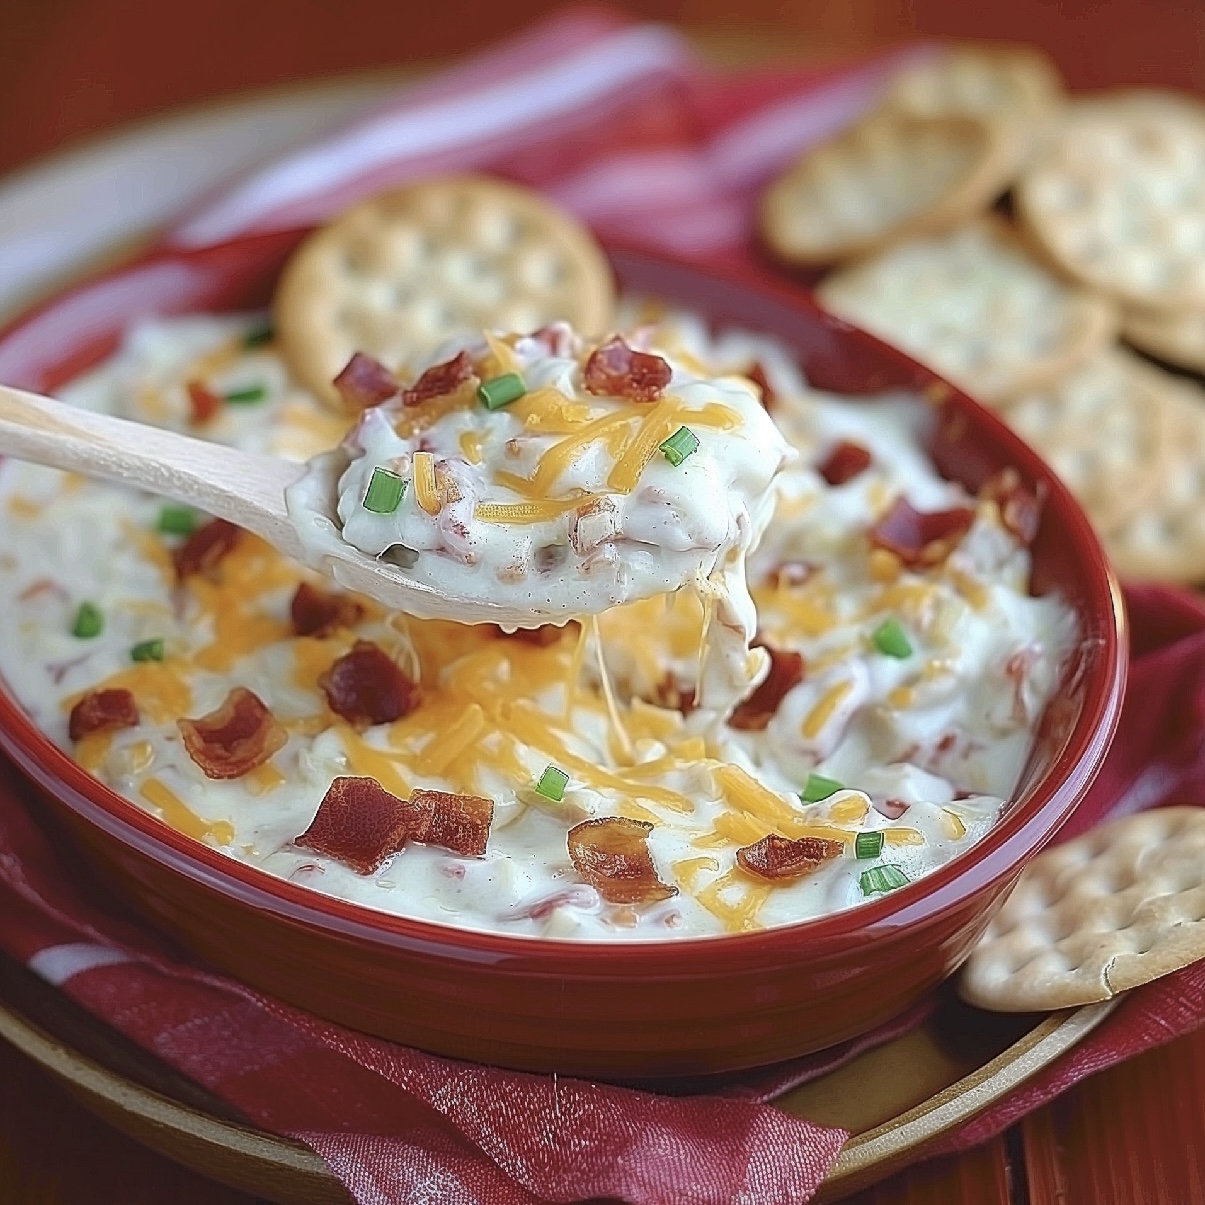 Bring the family together with this beloved cheese dip recipe. It's easy, delicious, and perfect for any occasion!